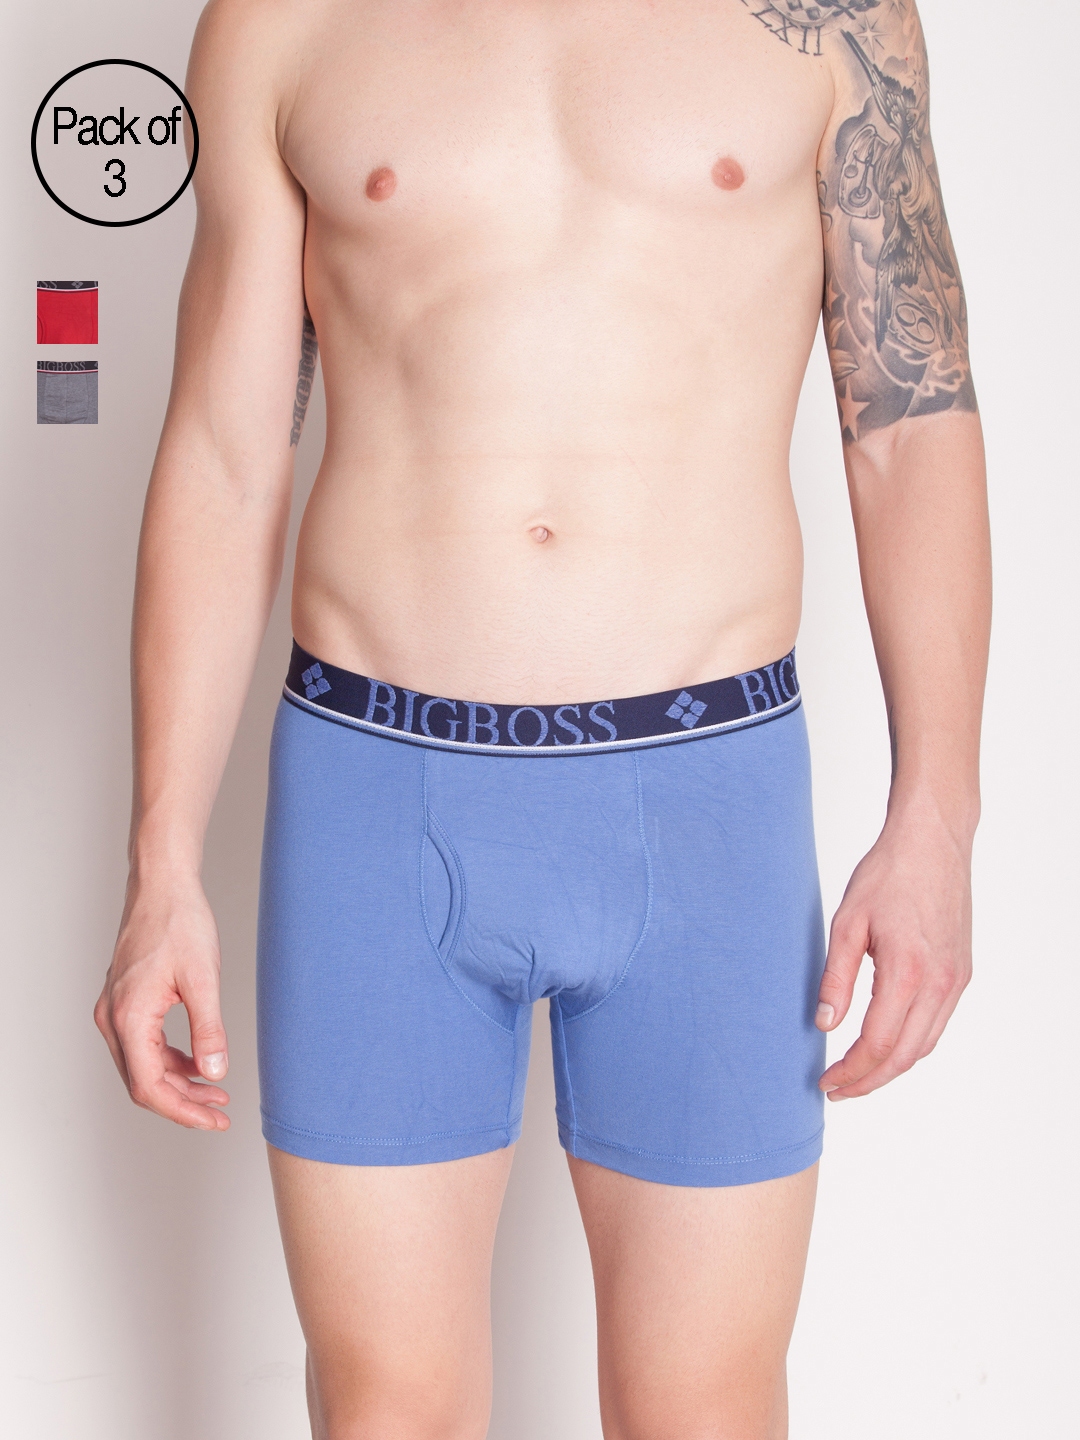 Buy Dollar Bigboss Solid Trunks - Blue Online at Low Prices in